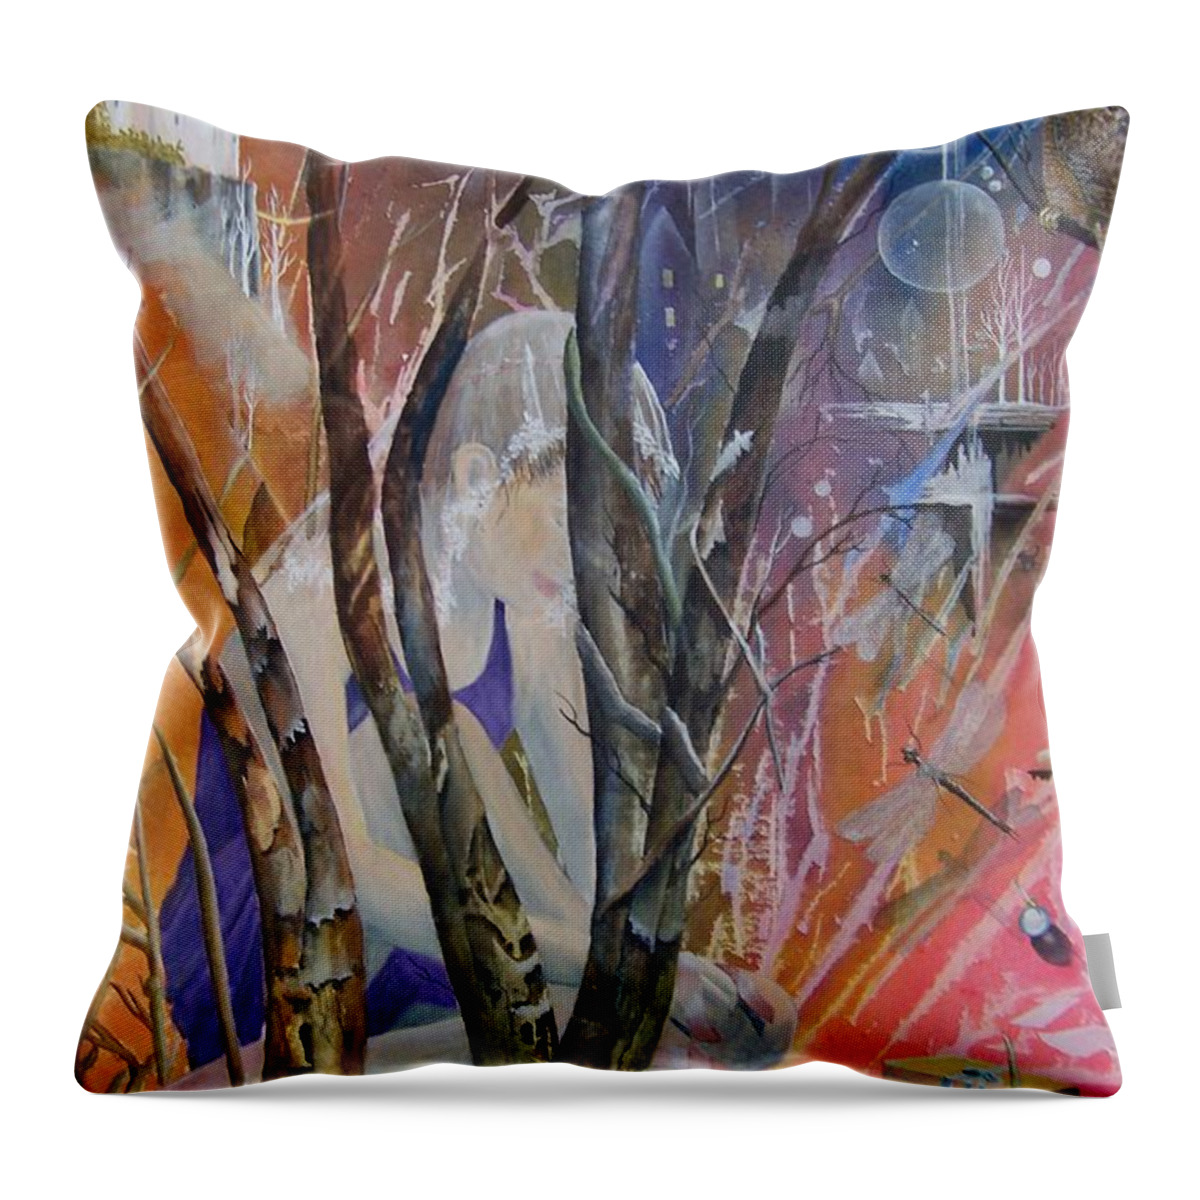 Dancer Throw Pillow featuring the painting Morna And Her Dancing Shoes by Jackie Mueller-Jones